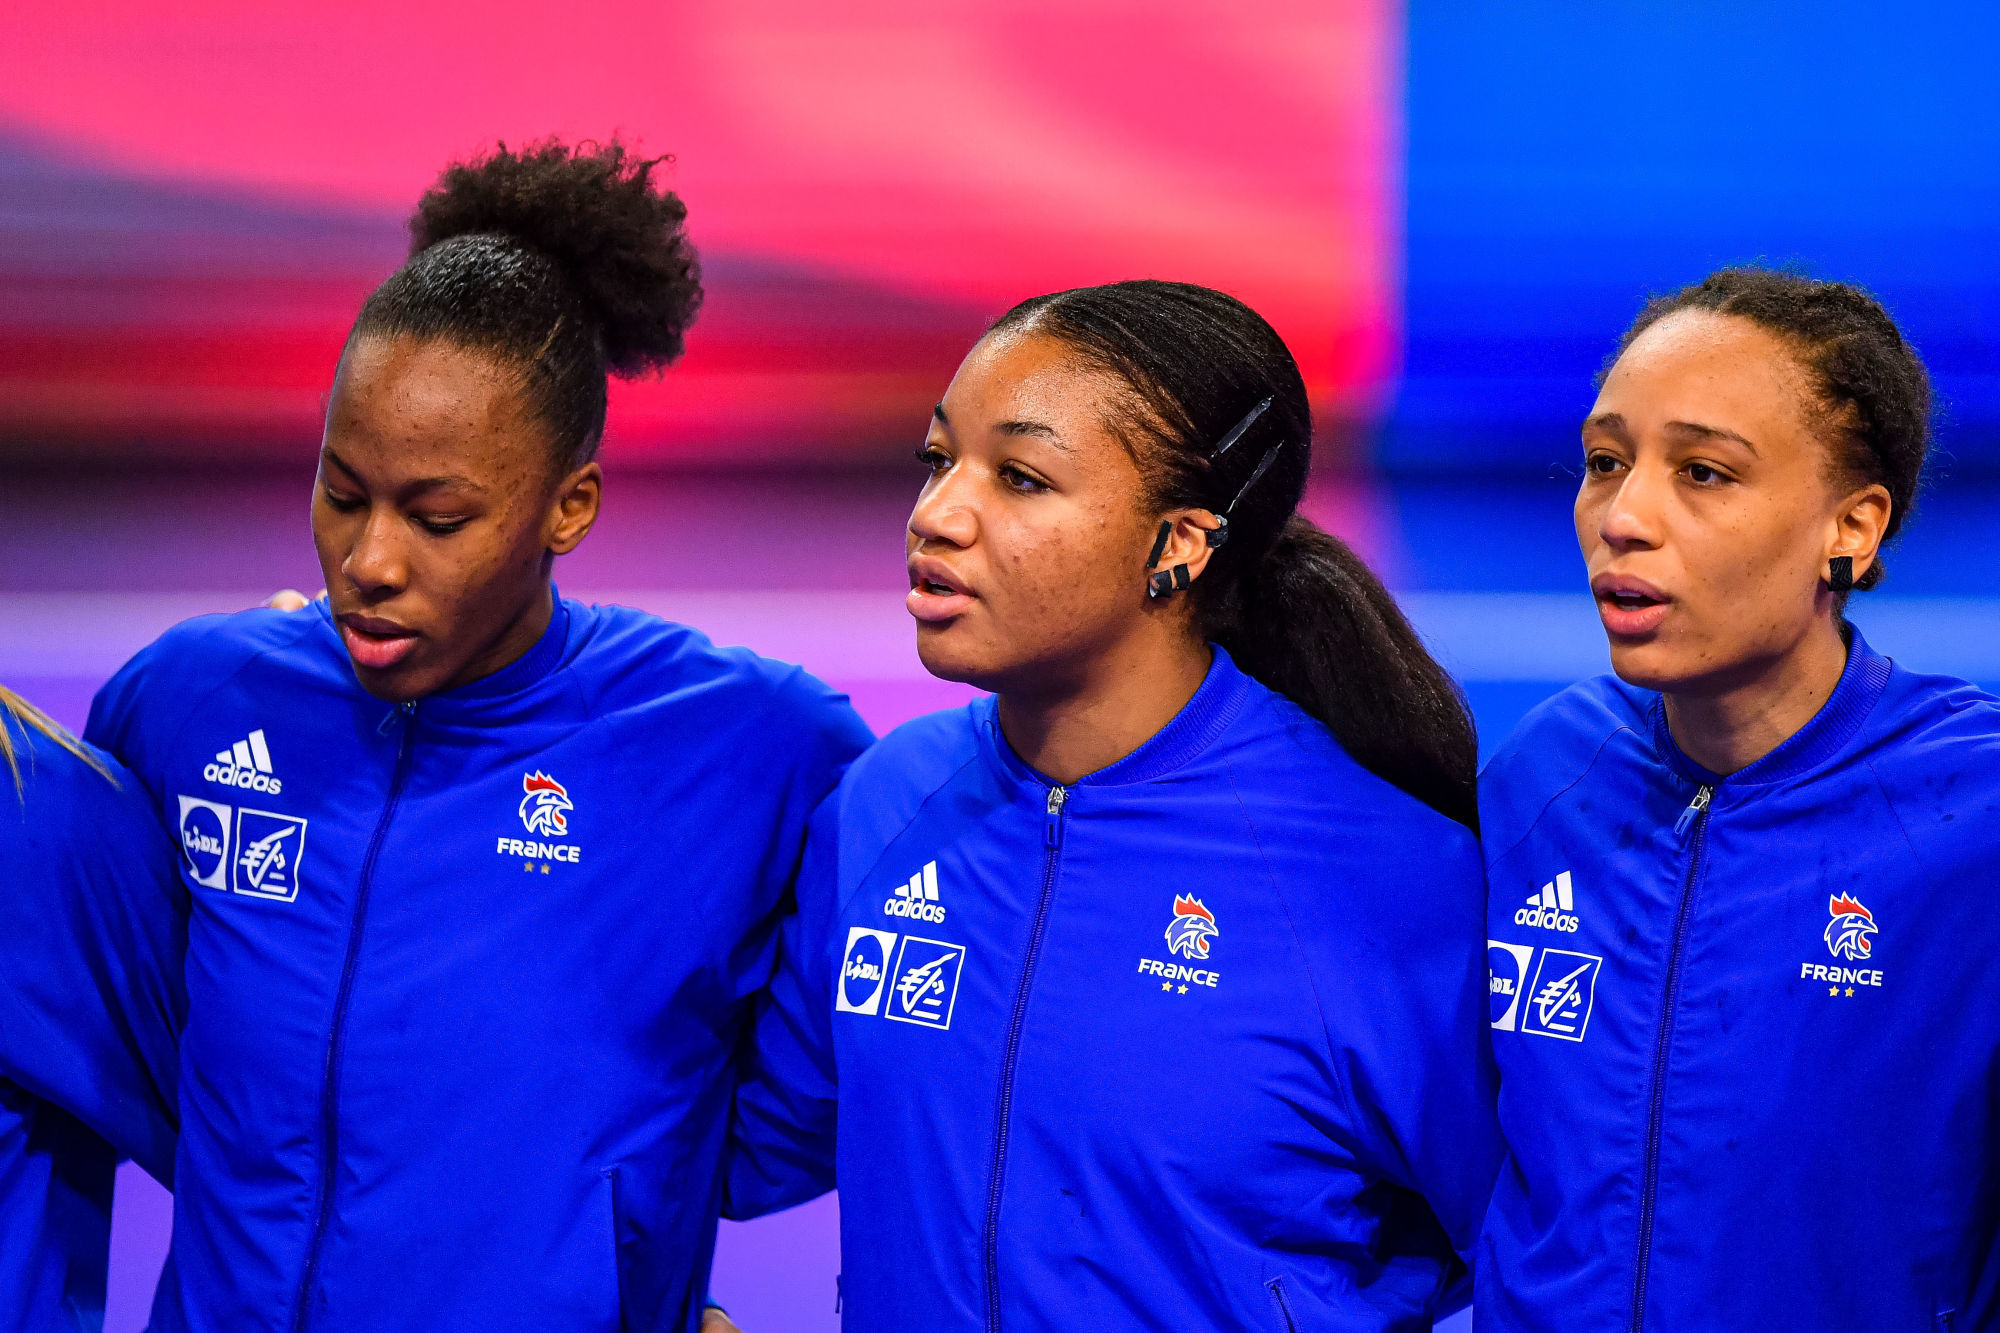 (L-R) Orlane KANOR of France, Pauletta FOPPA of France and Beatrice EDWIGE of France ahead of the Womens international handball friendly match between France and Danmark on March 20, 2021 in Creteil, France. (Photo by Baptiste Fernandez/Icon Sport) - Beatrice EDWIGE - Pauletta FOPPA - Orlane KANOR - Maison du Handball - Creteil (France)